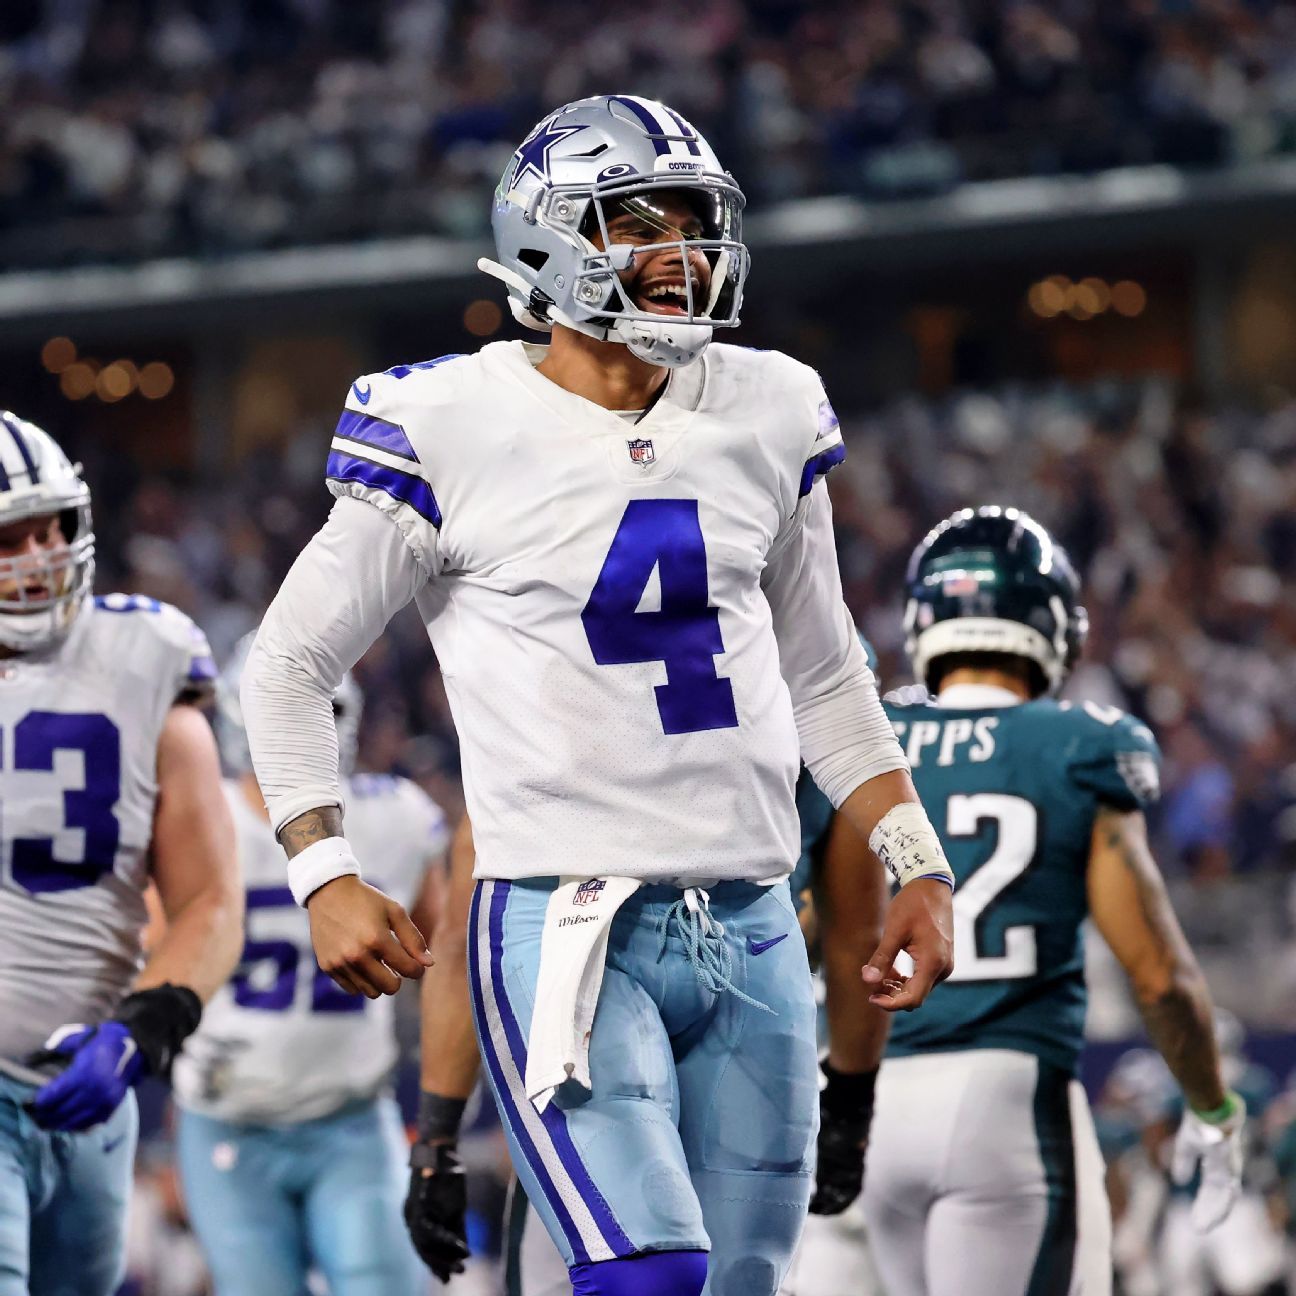 Dallas Cowboys QB Dak Prescott says he’s playing at career-best level after ‘special’ return to AT&T Stadium